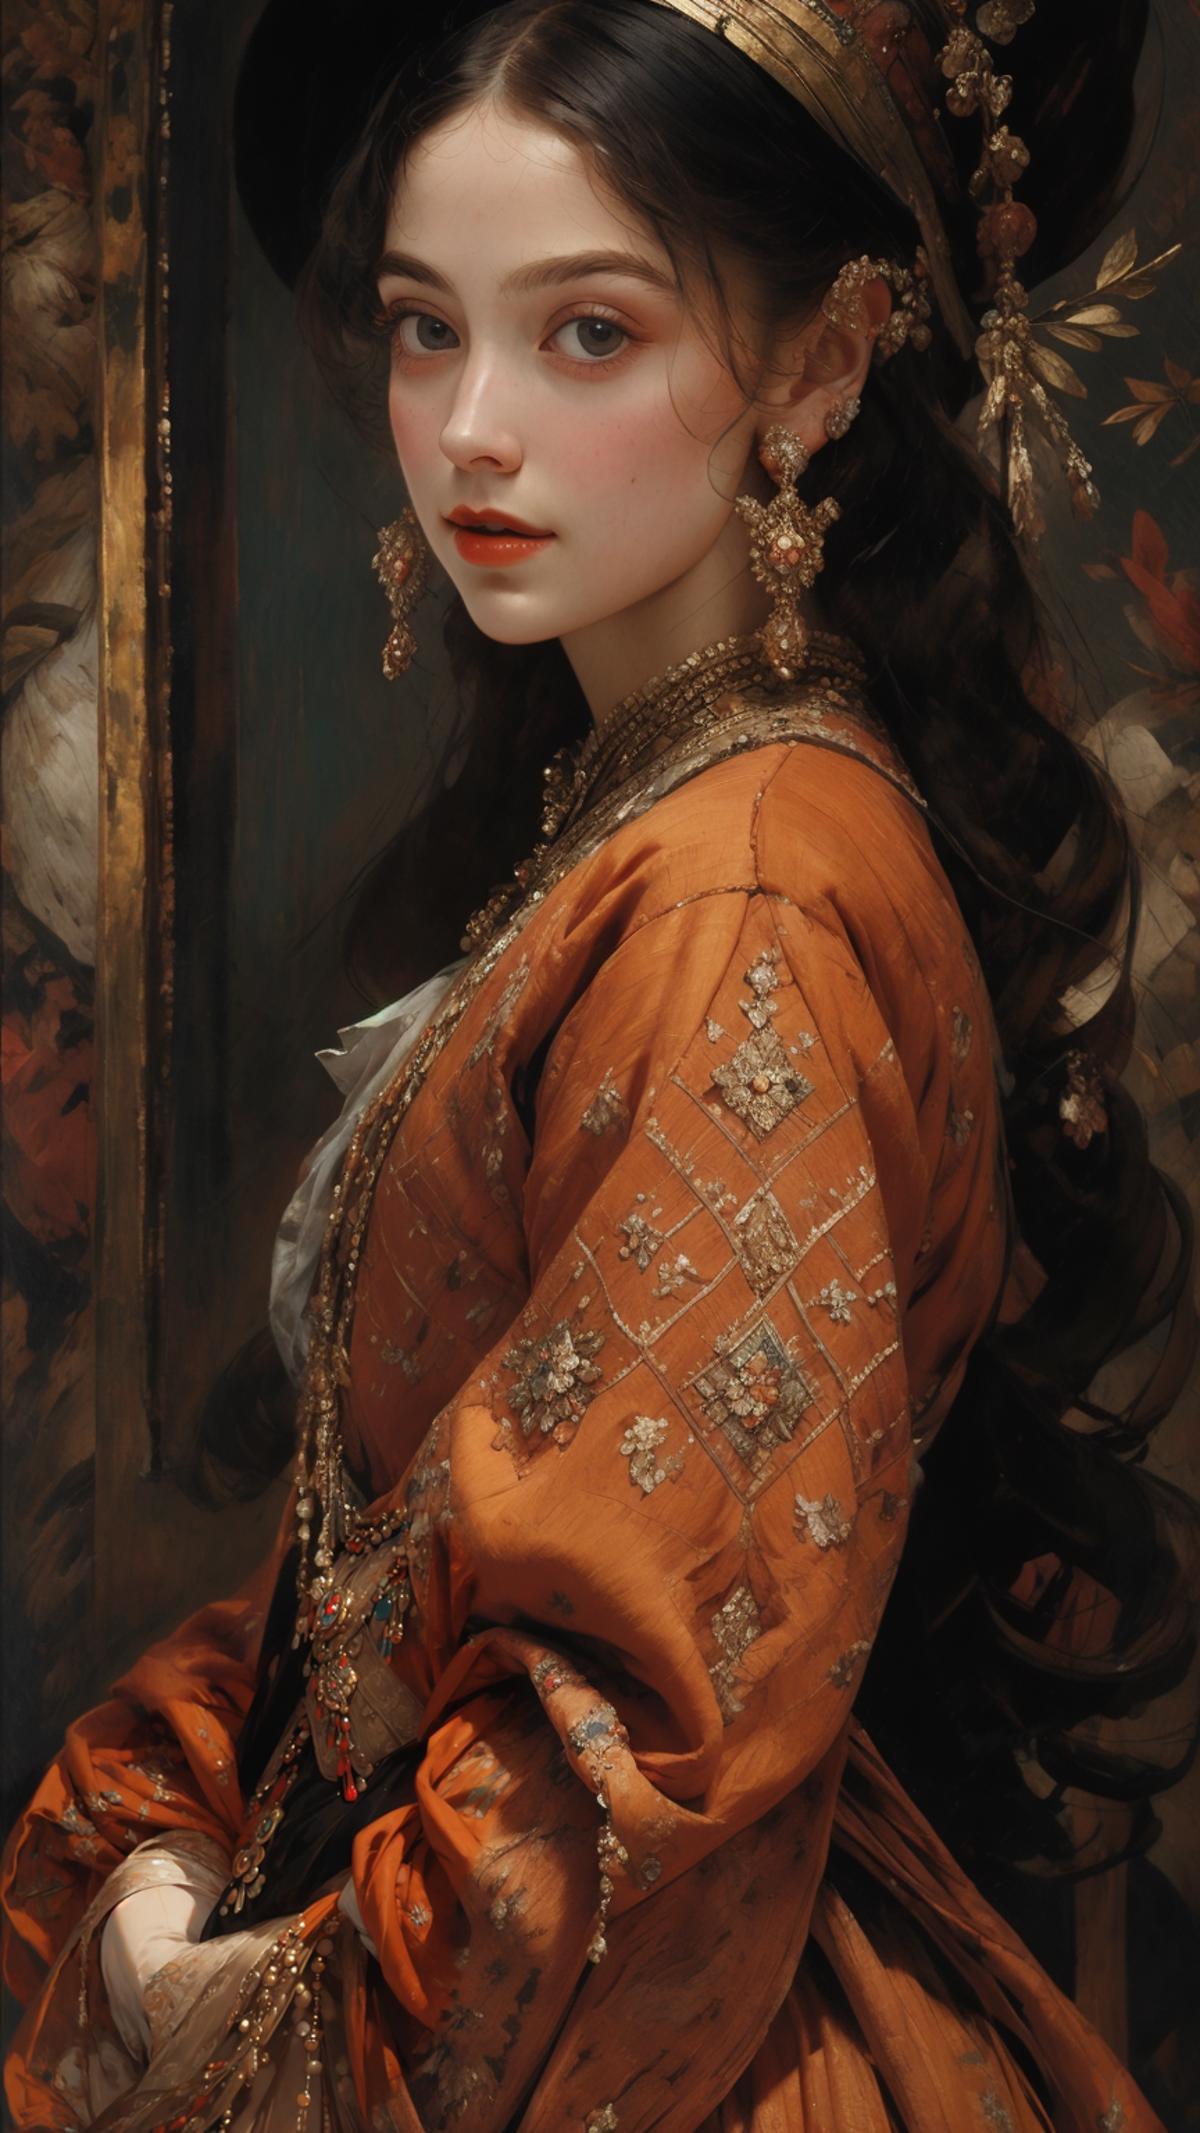 A beautifully drawn portrait of a woman wearing an orange dress, with her hair in a braid and jewelry adorning her.